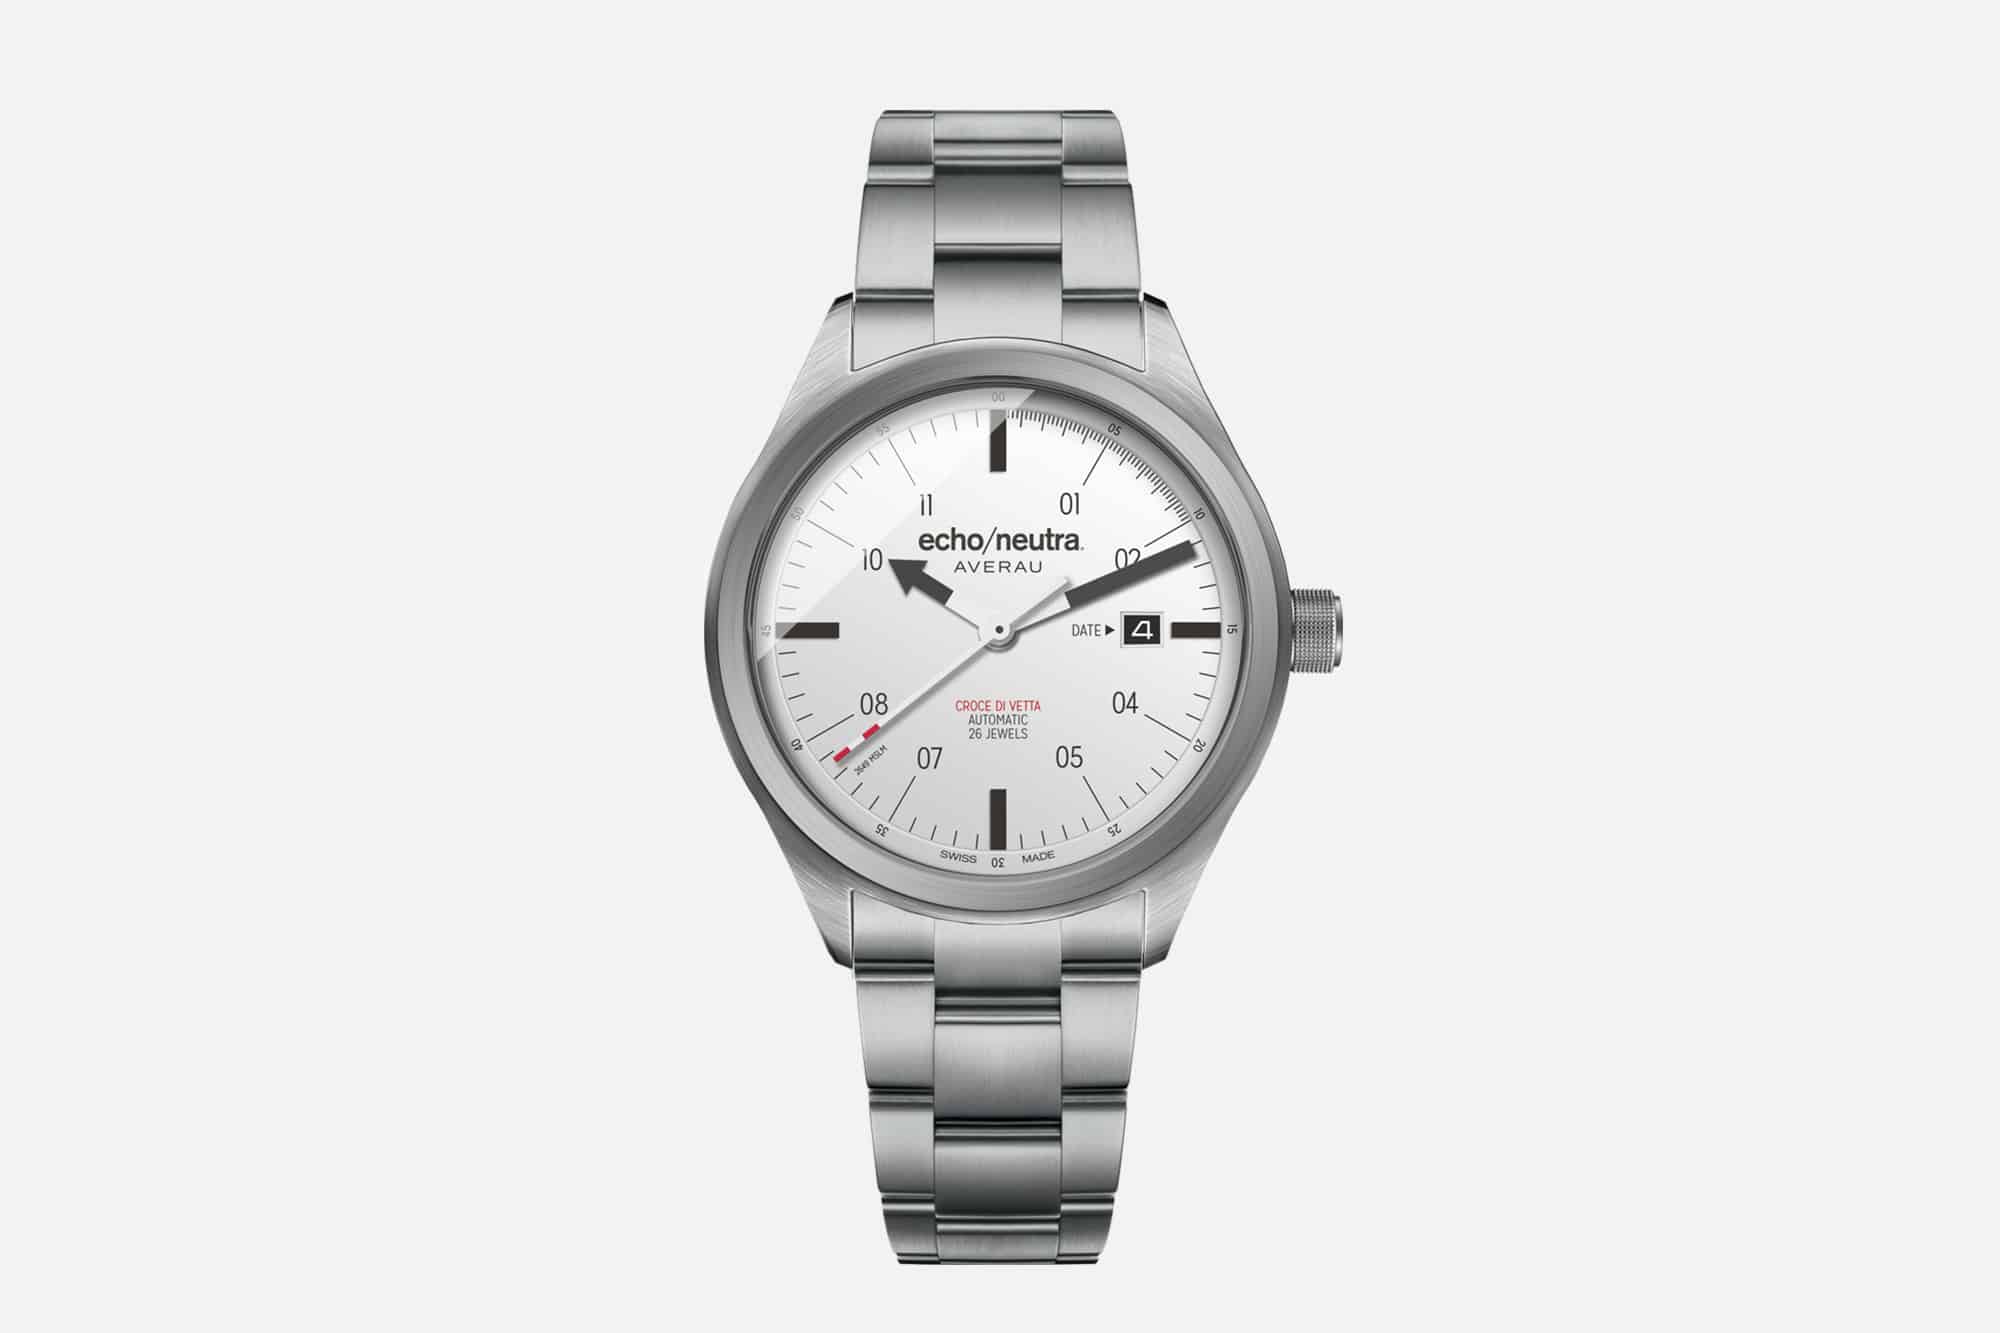 echo/neutra Has a Lock on Dolomite Inspired Watches with the Averau